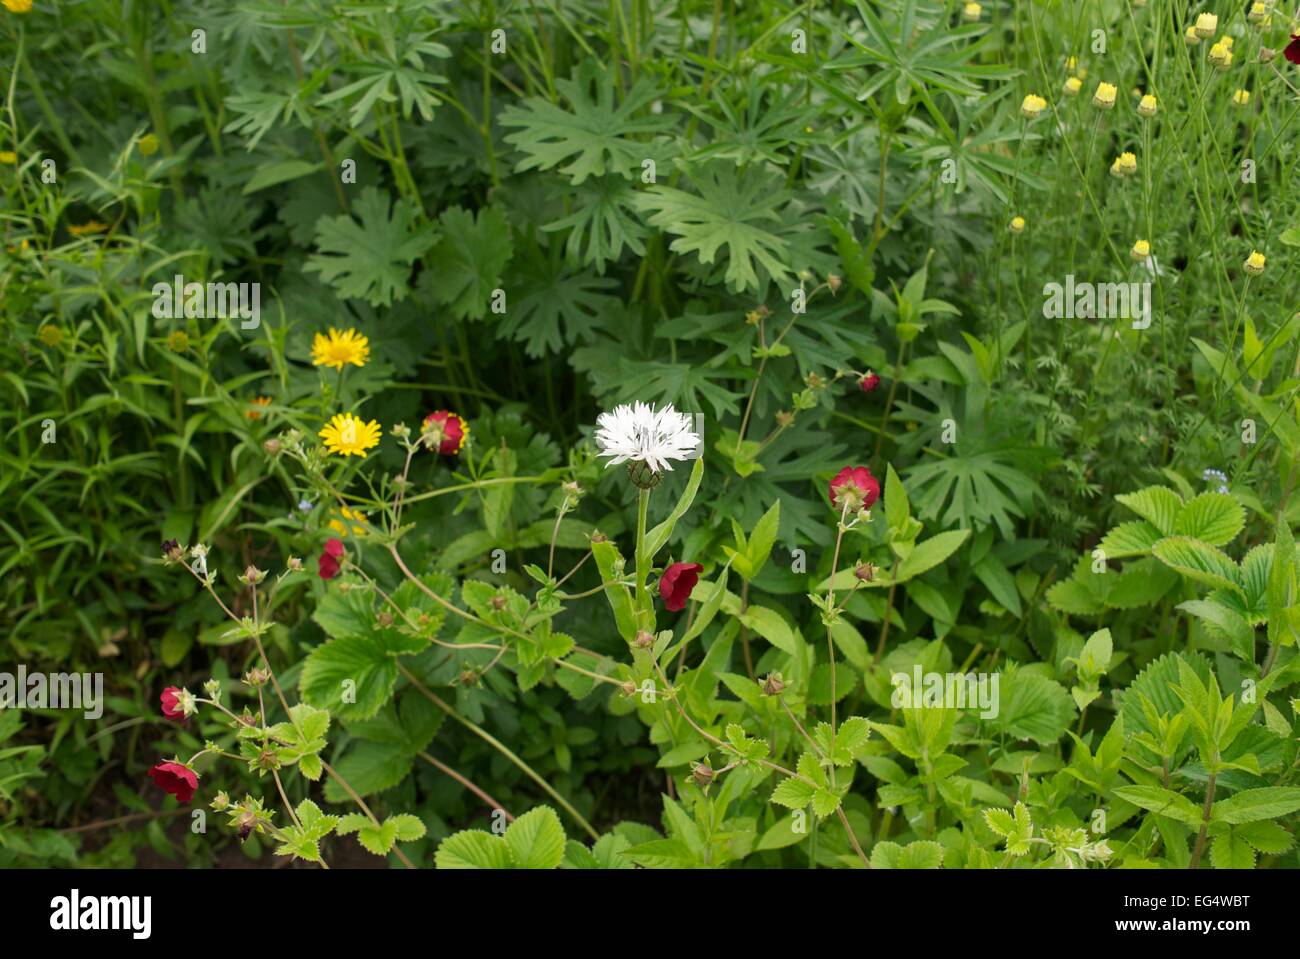 White Squarrose Knapweed and Dandelions in a garden Stock Photo